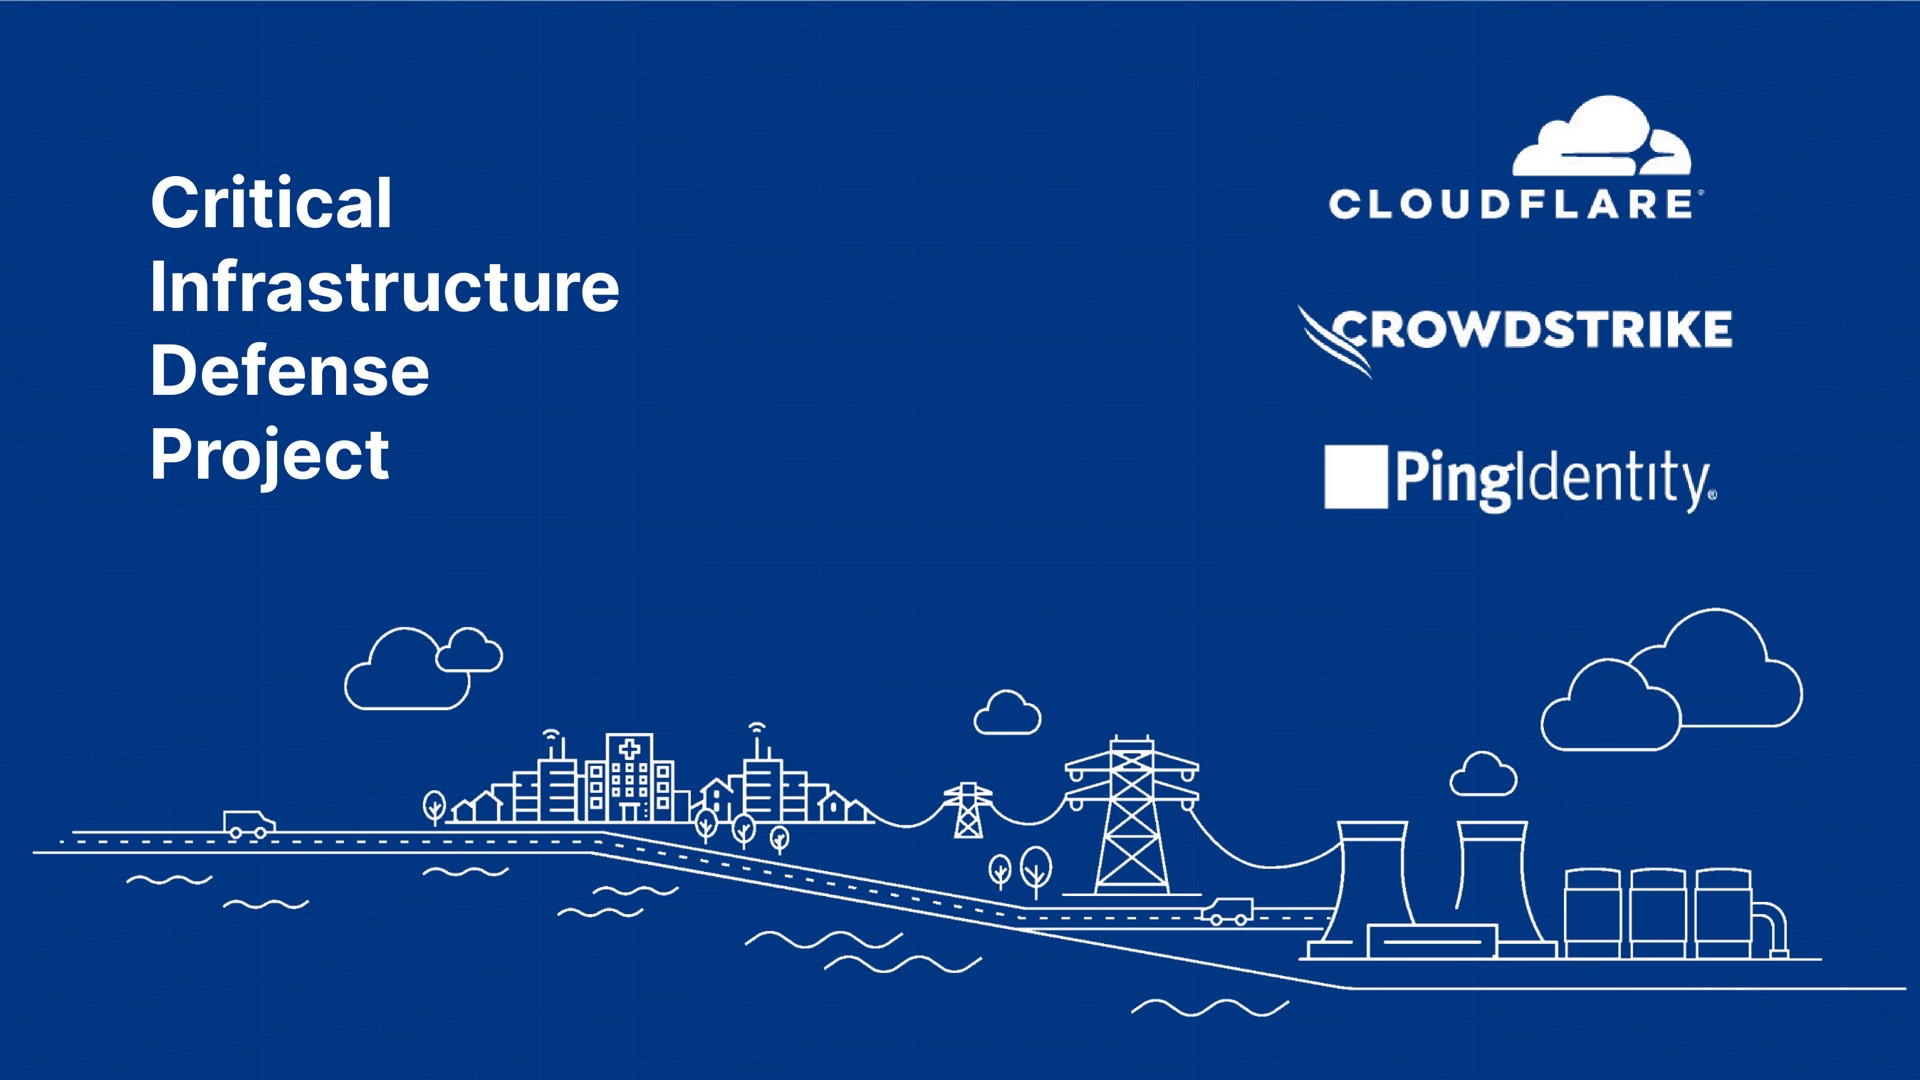 critical infrastructure defense project tae eave | Cloudflare